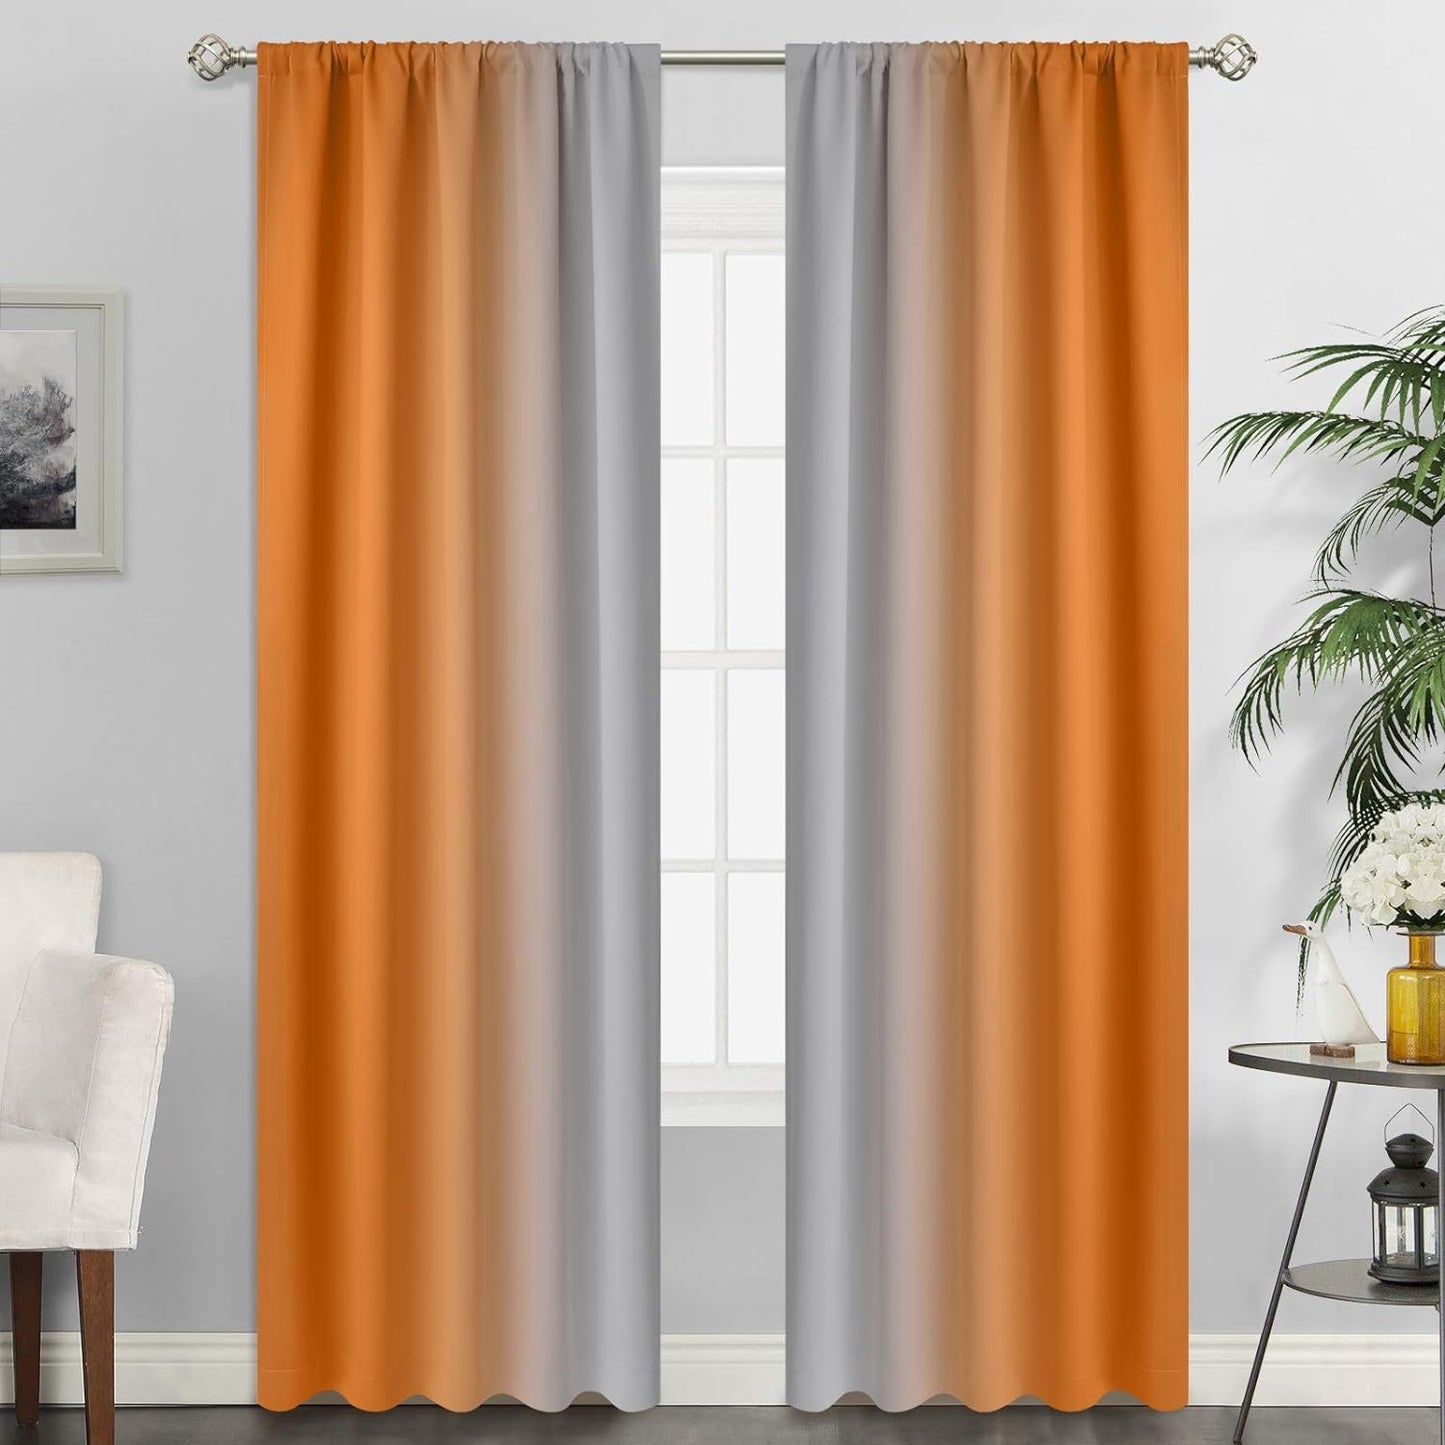 Simplehome Ombre Room Darkening Curtains for Bedroom, Light Blocking Gradient Purple to Greyish White Thermal Insulated Rod Pocket Window Curtains Drapes for Living Room,2 Panels, 52X84 Inches Length  SimpleHome Orange 52W X 84L / 2 Panels 